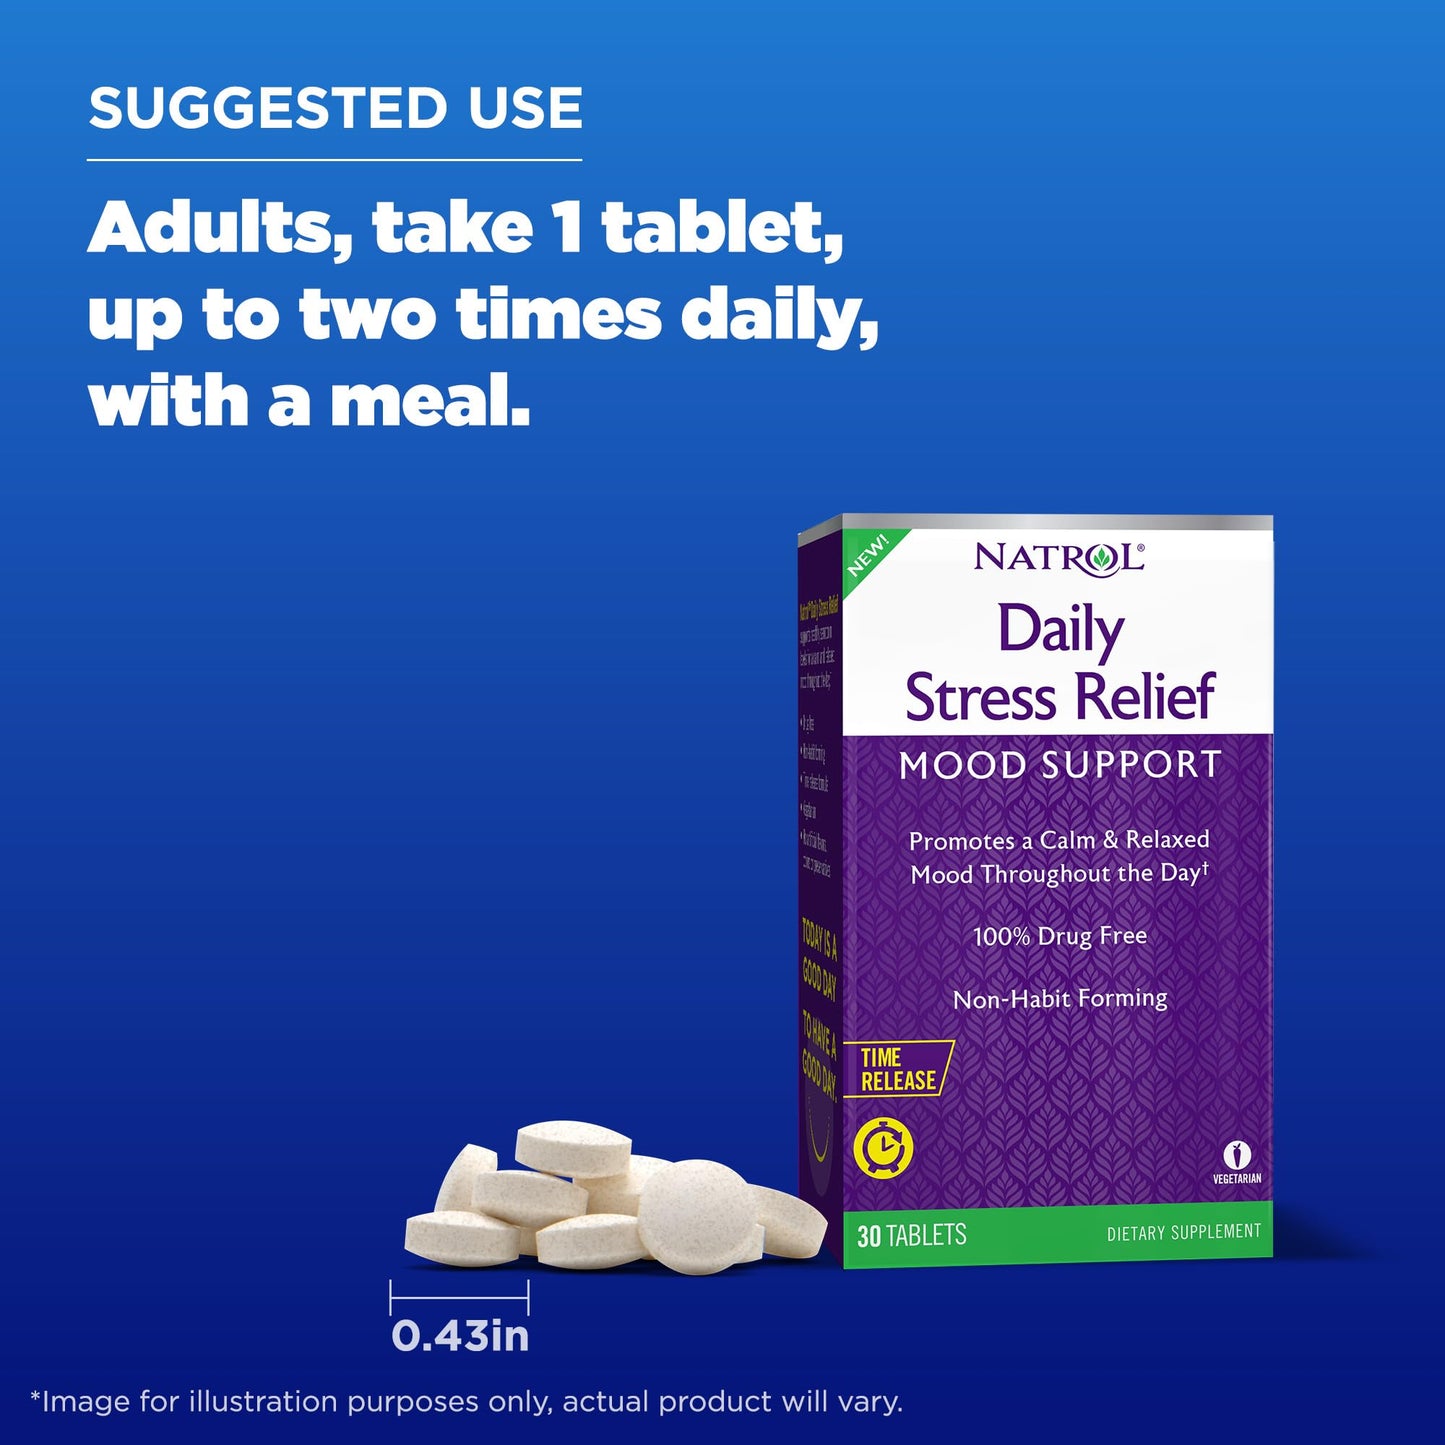 Natrol Daily Stress Relief Mood Support Time Release Tablets, Promotes a Calm and Relaxed Mood, 100mg, 30 Count